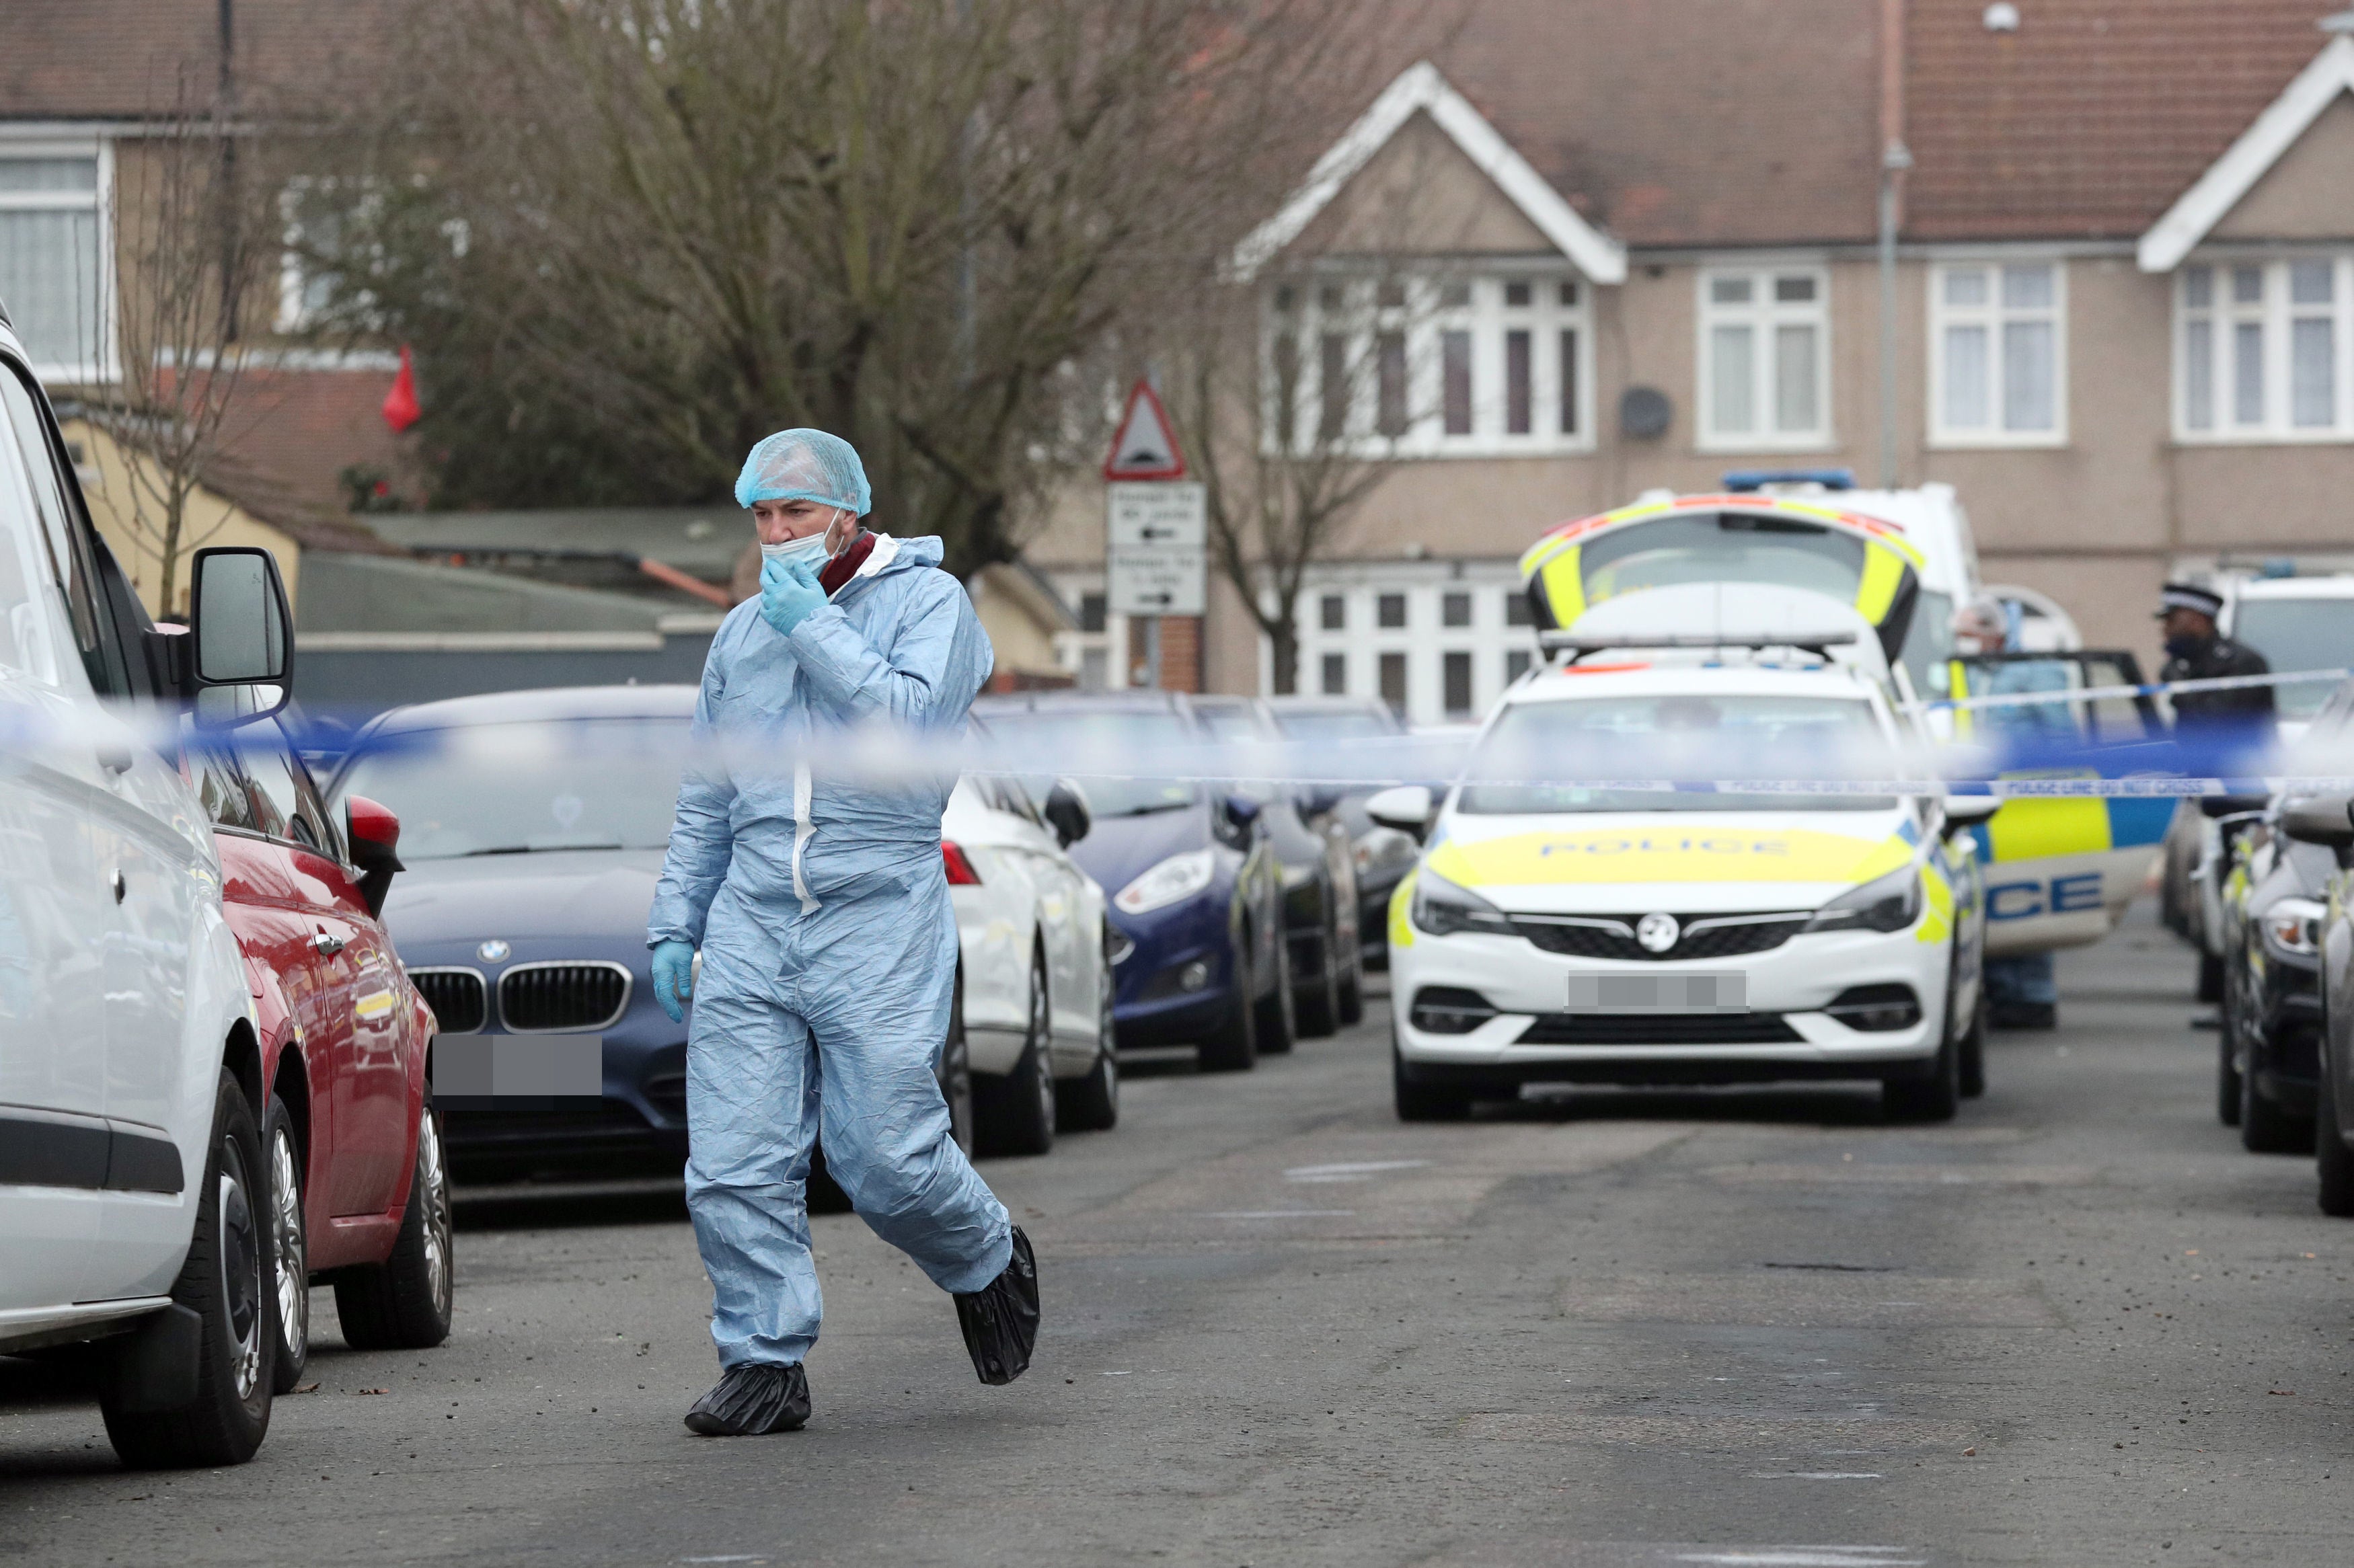 Forensic officers at the scene in Ilford, east London on Sunday